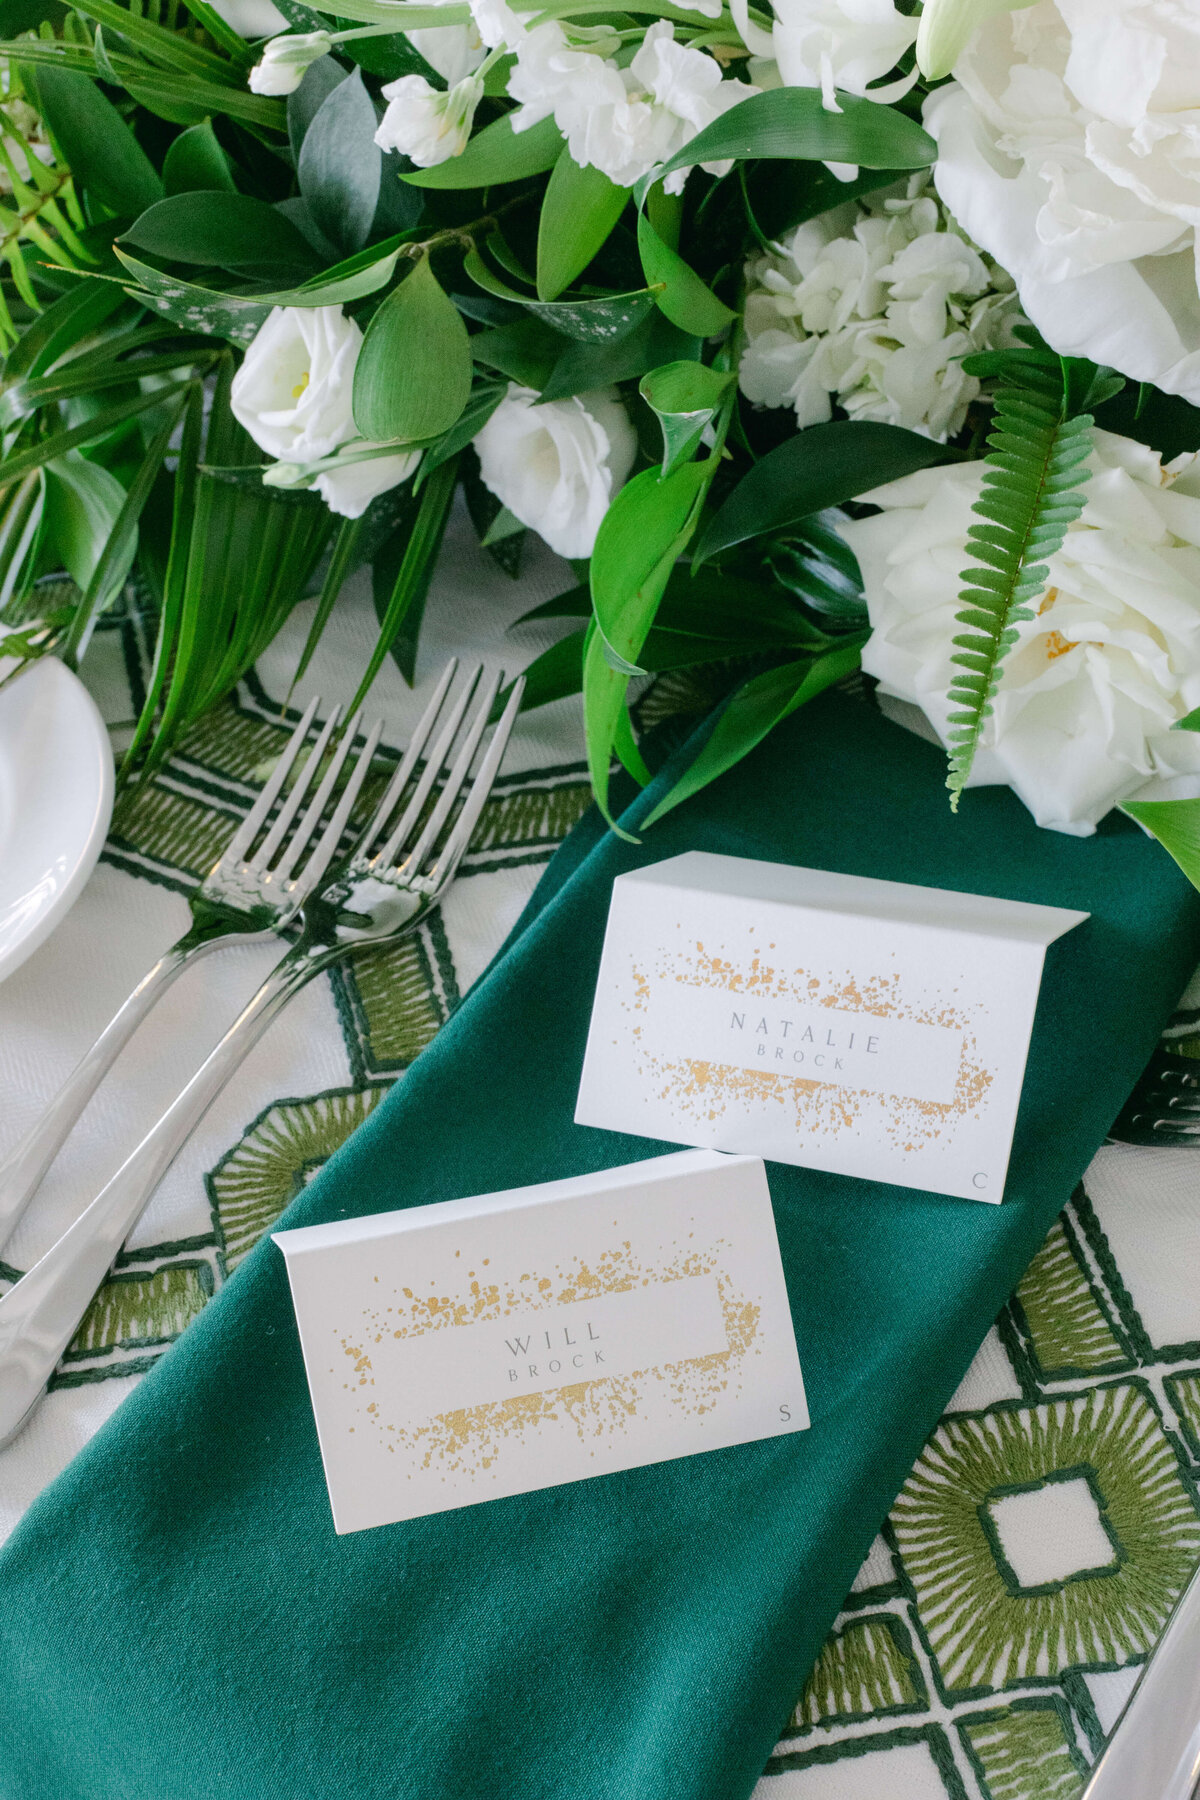 Name cards sitting on a green banner.